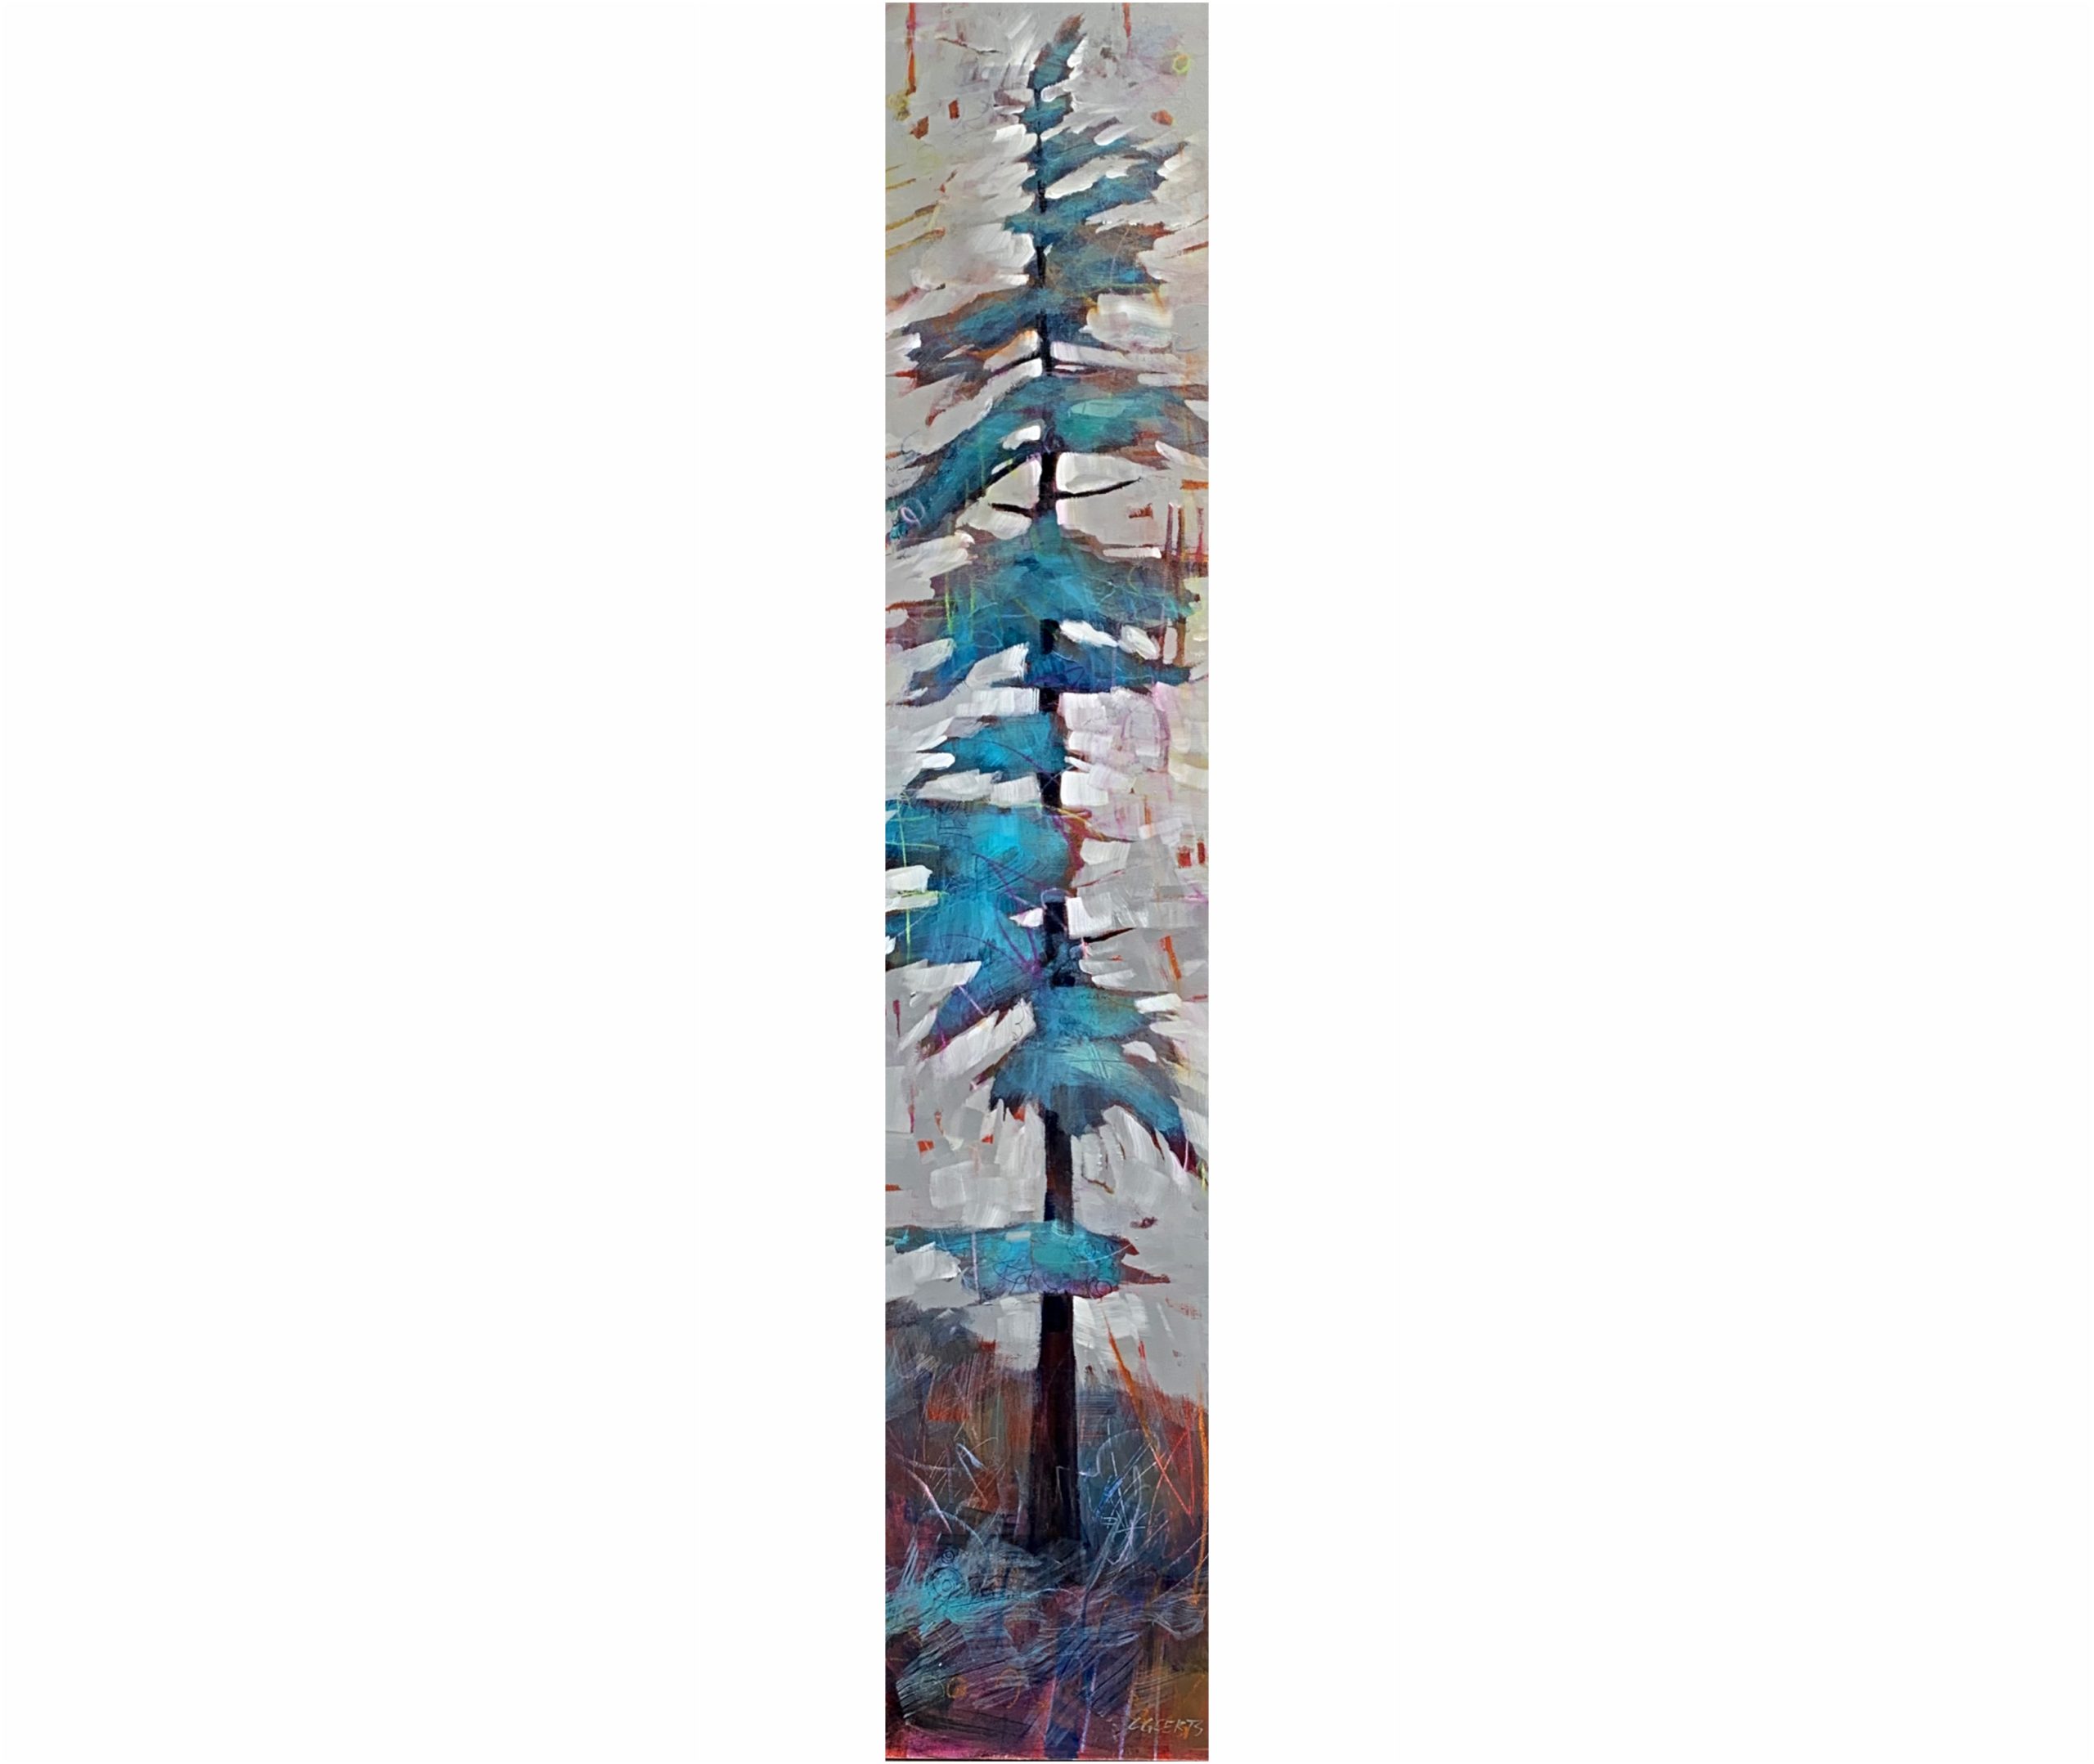 Stand Tall, mixed media tree painting by Connie Geerts | Effusion Art Gallery + Cast Glass Studio, Invermere BC